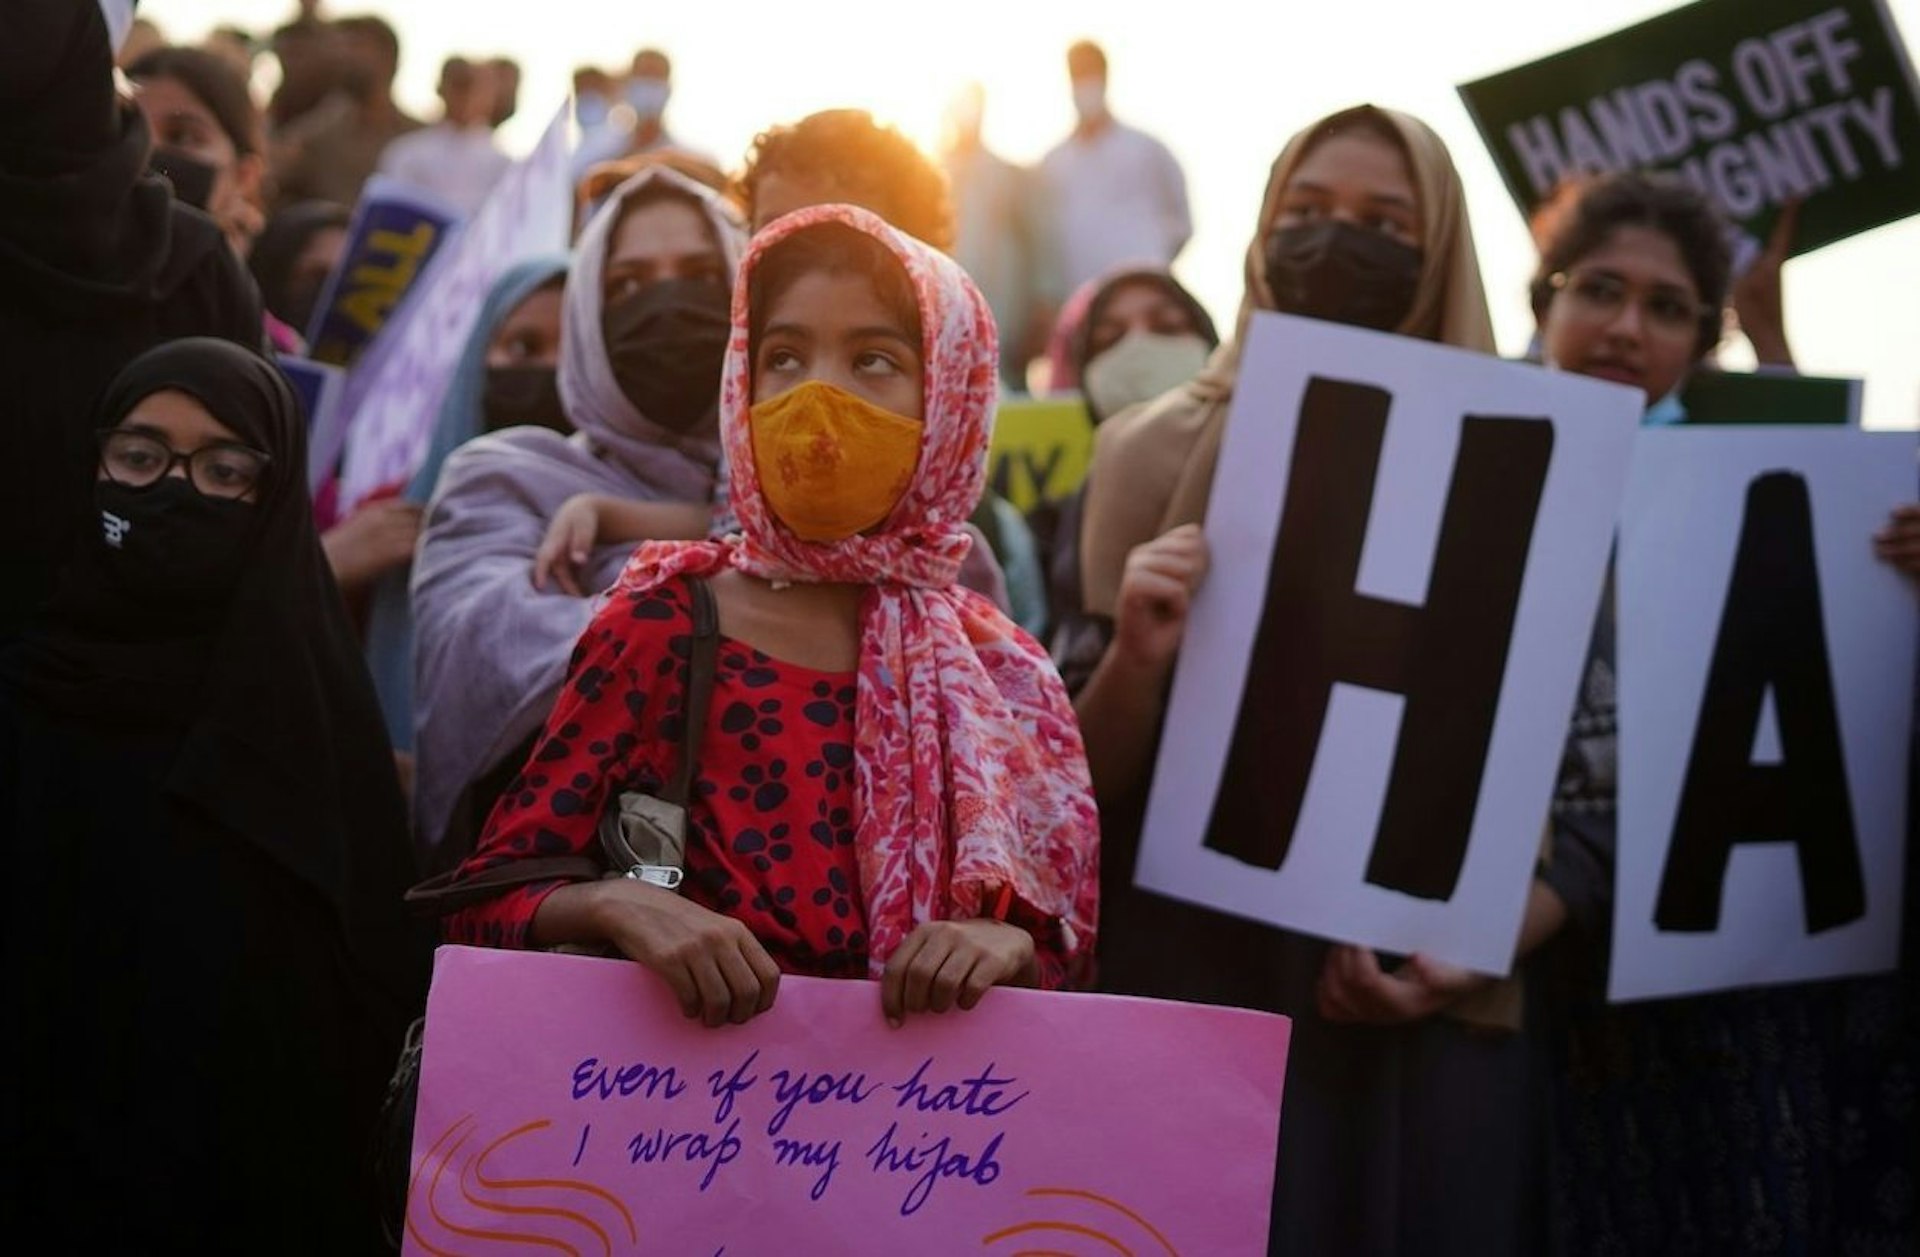 In India, Muslim students are resisting the hijab ban